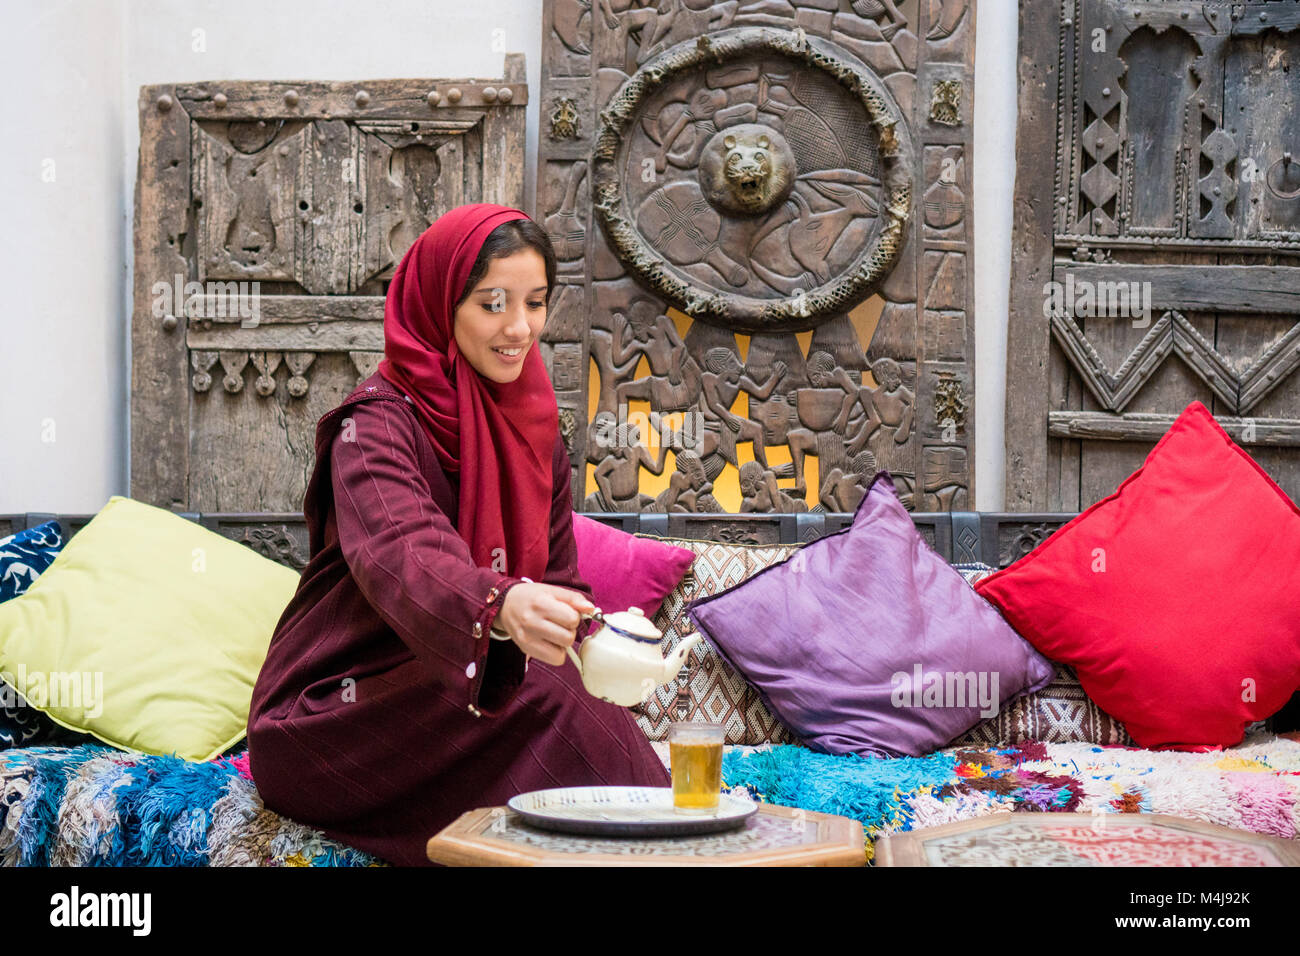 Arab woman in traditional red clothing with hijab on her head pouring a tea in traditional middle eastern ambient Stock Photo